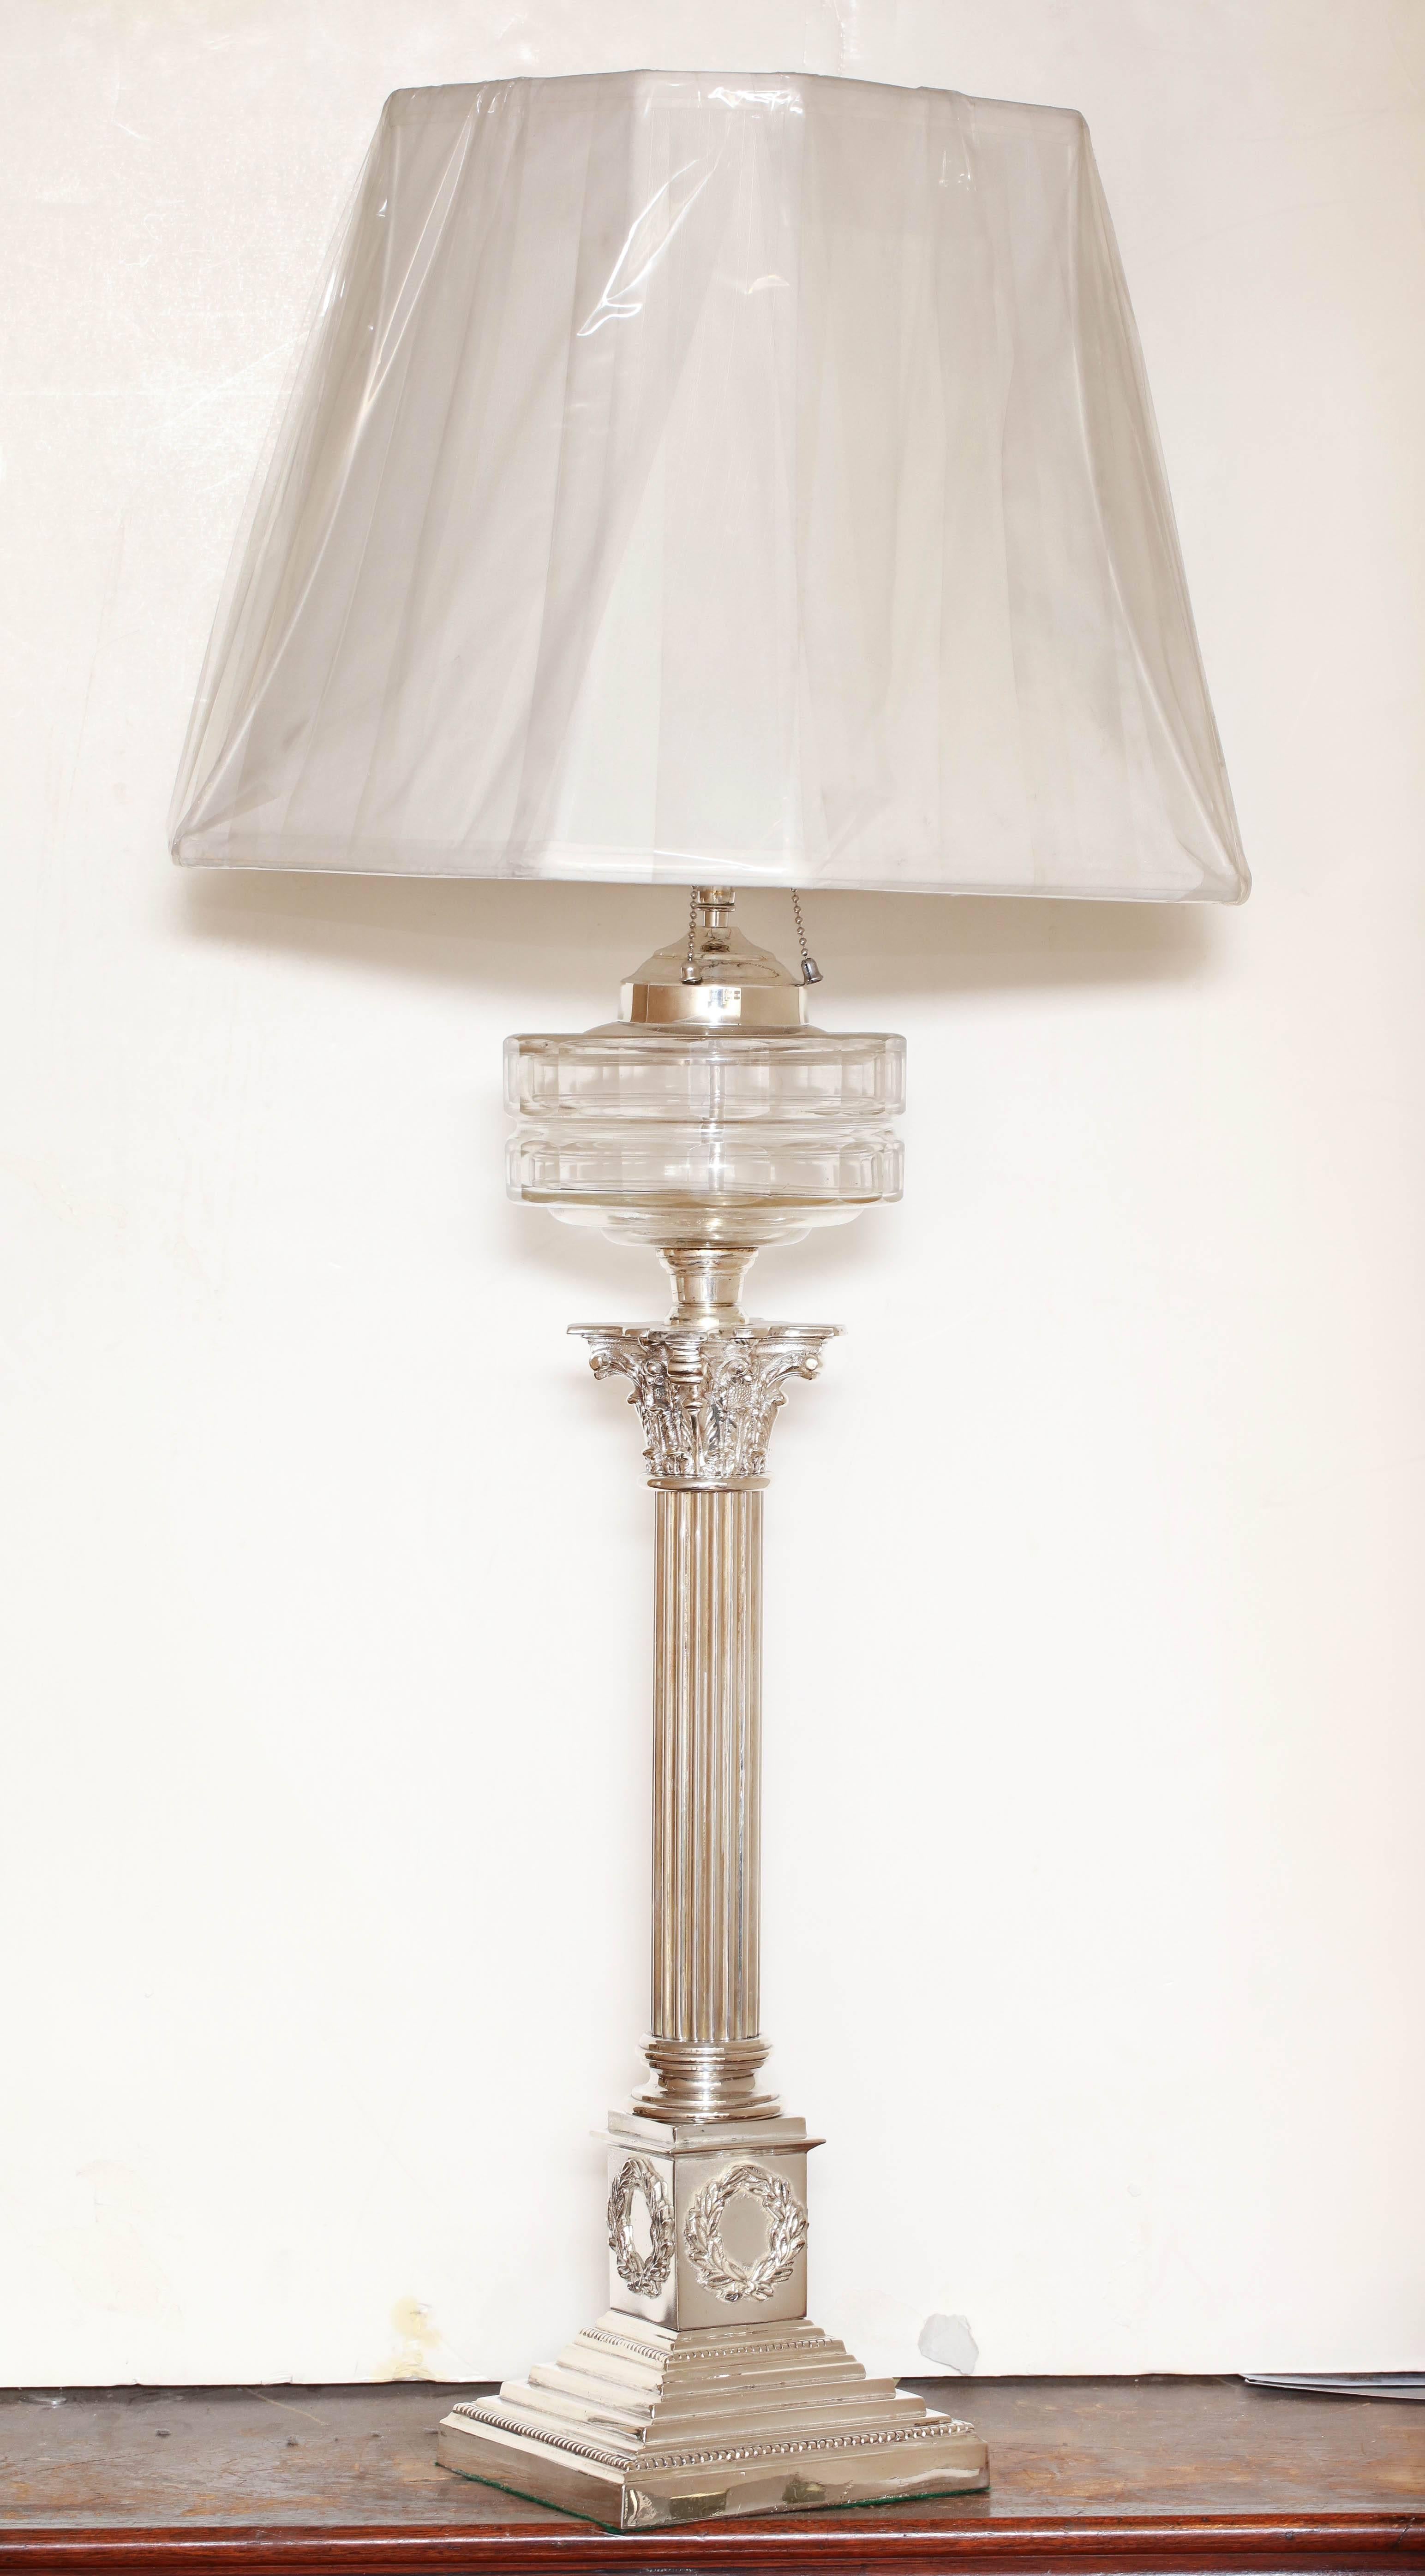 Tall, neoclassical, electrified, column-form oil lamp, England, circa 1880s. Stepped - up square base. 38 inches high Ito top of finial) height is adjustable x 6 1/2 inches wide (at base) x 6 1/2 inches deep (at base). Column itself, without oil